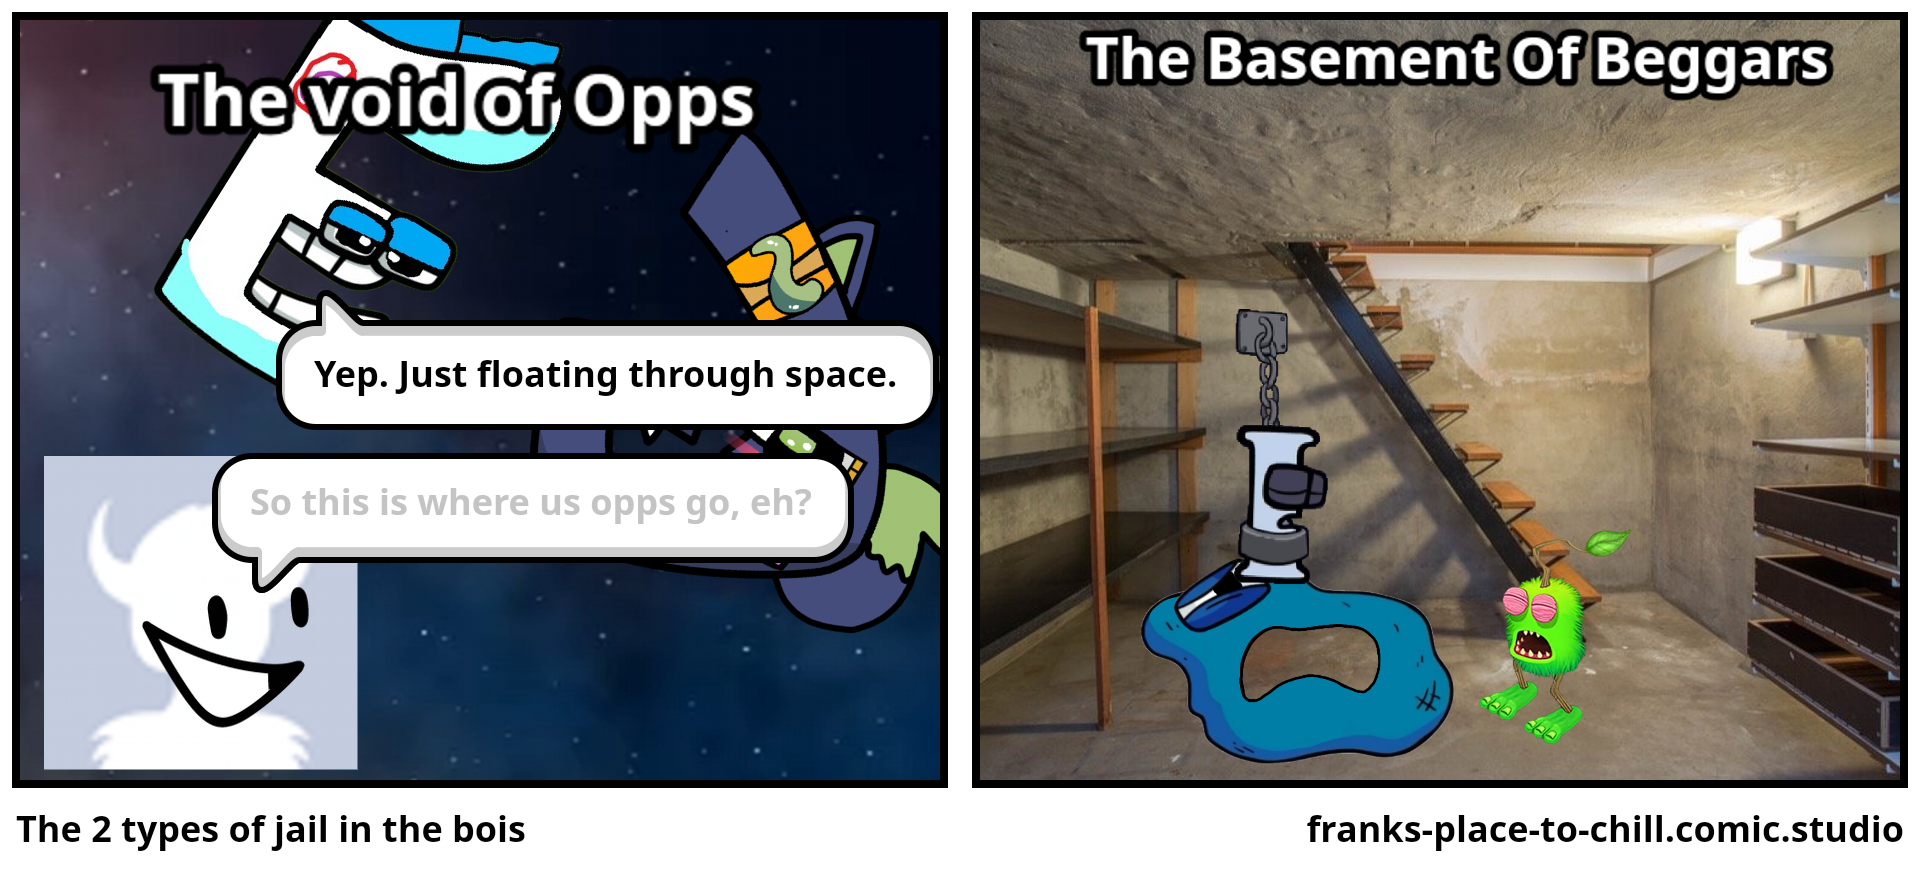 The 2 types of jail in the bois